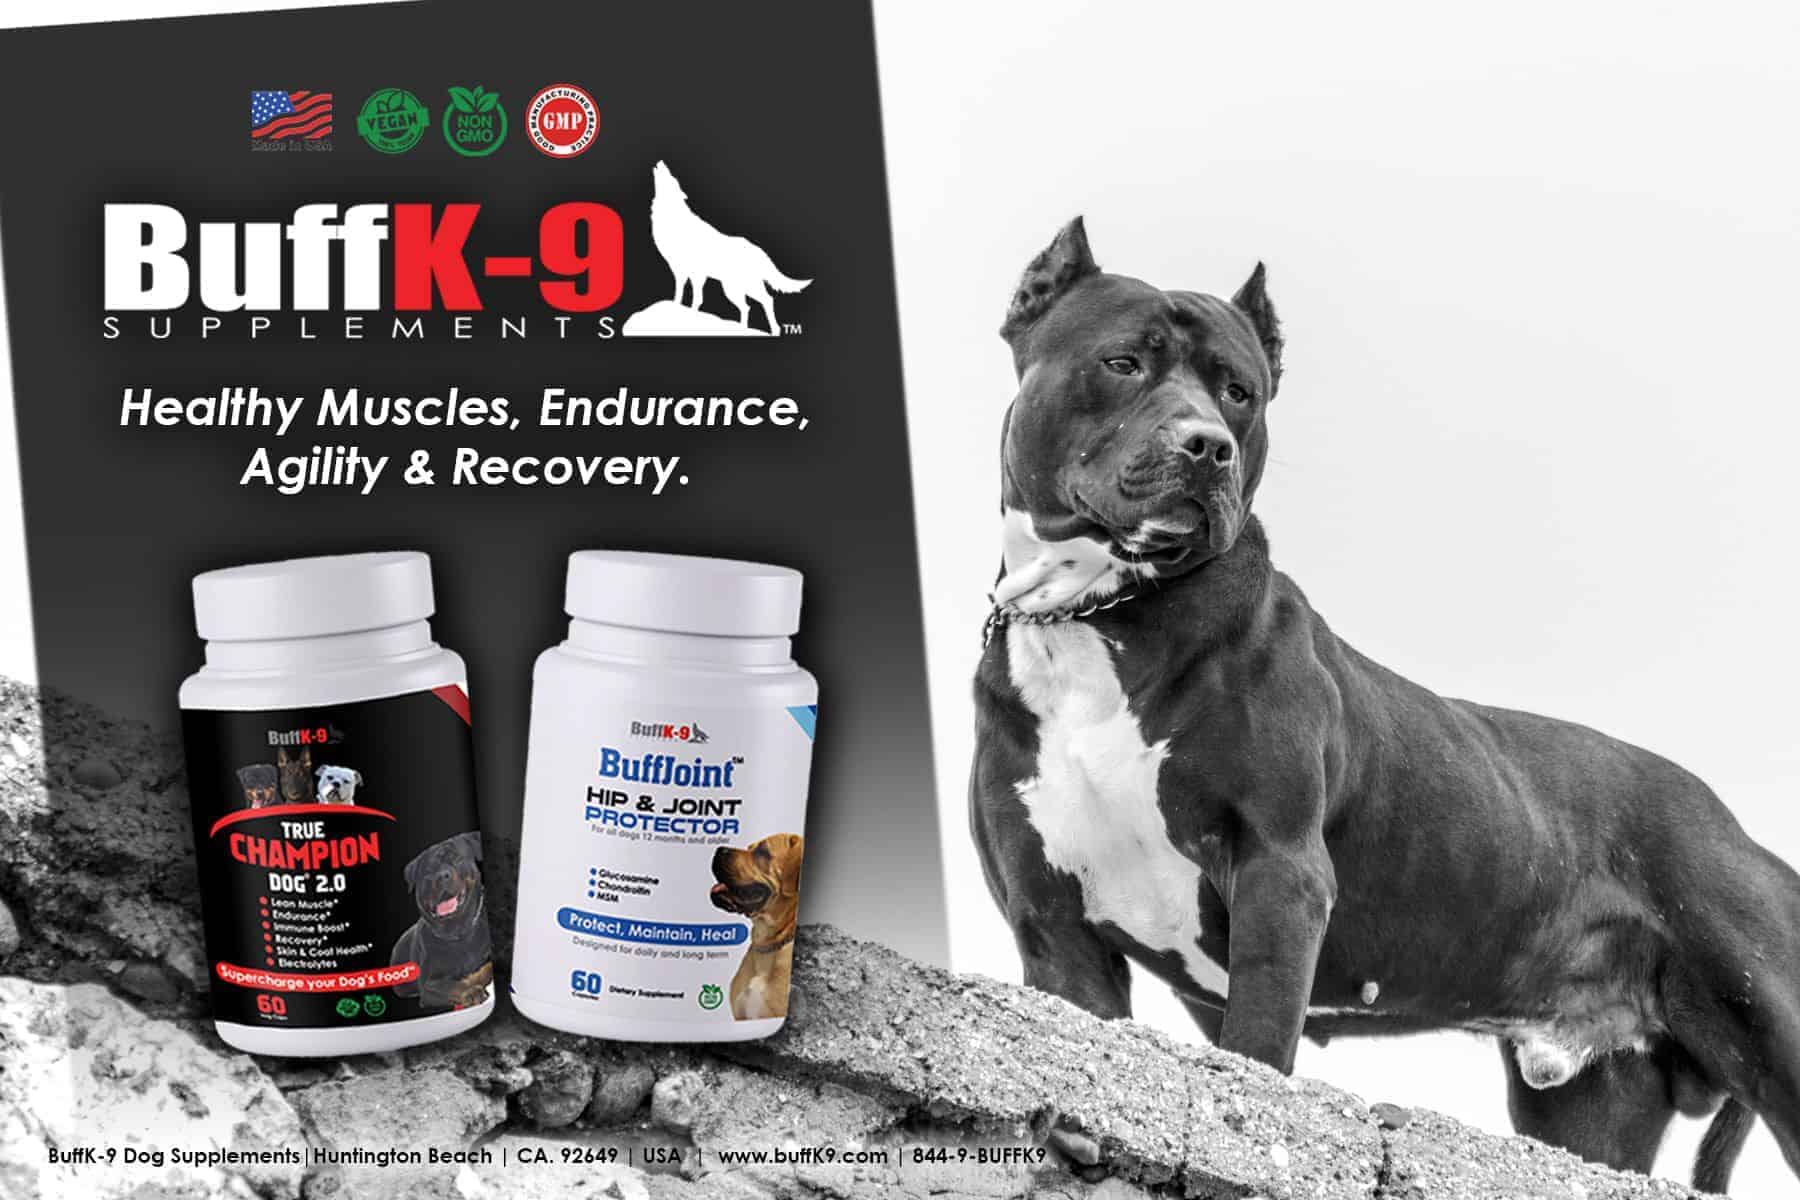 Vitamins for Pitbulls and ALL Dogs by 